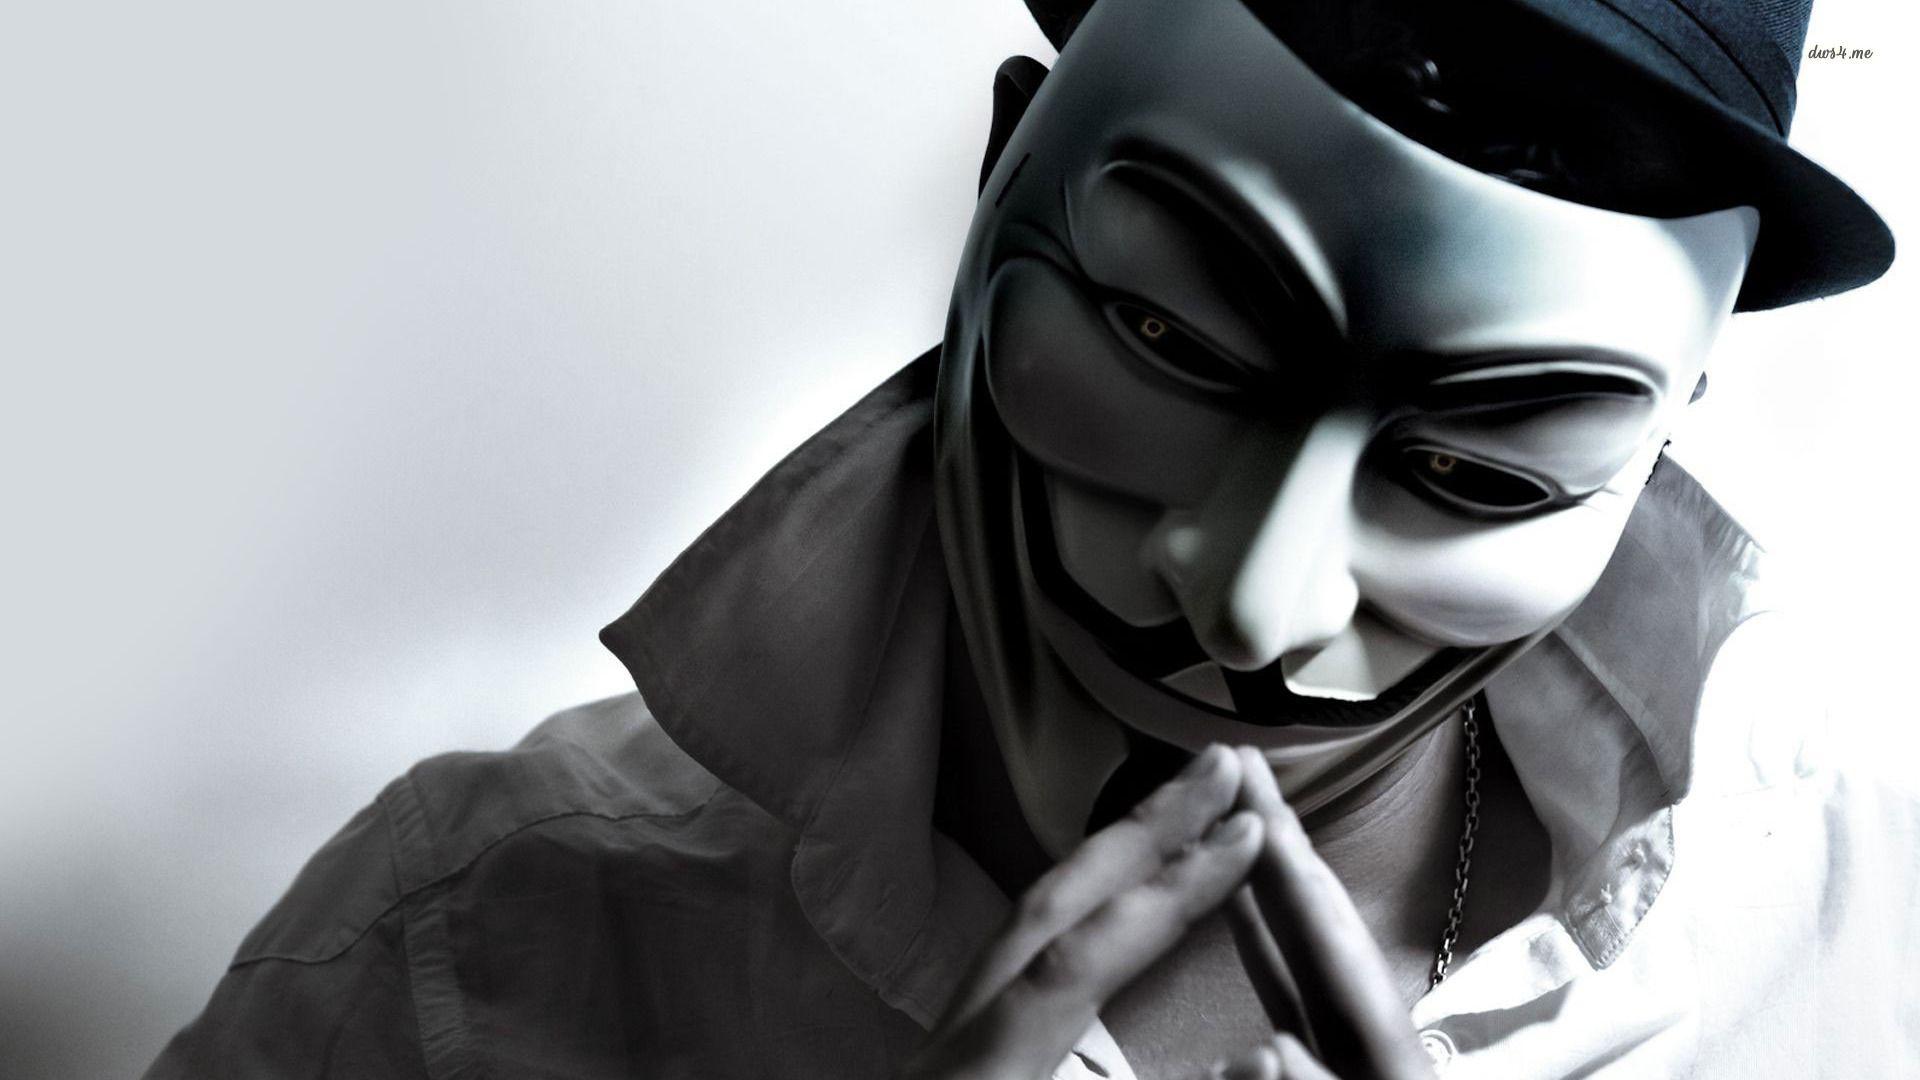 Anonymous wallpapers